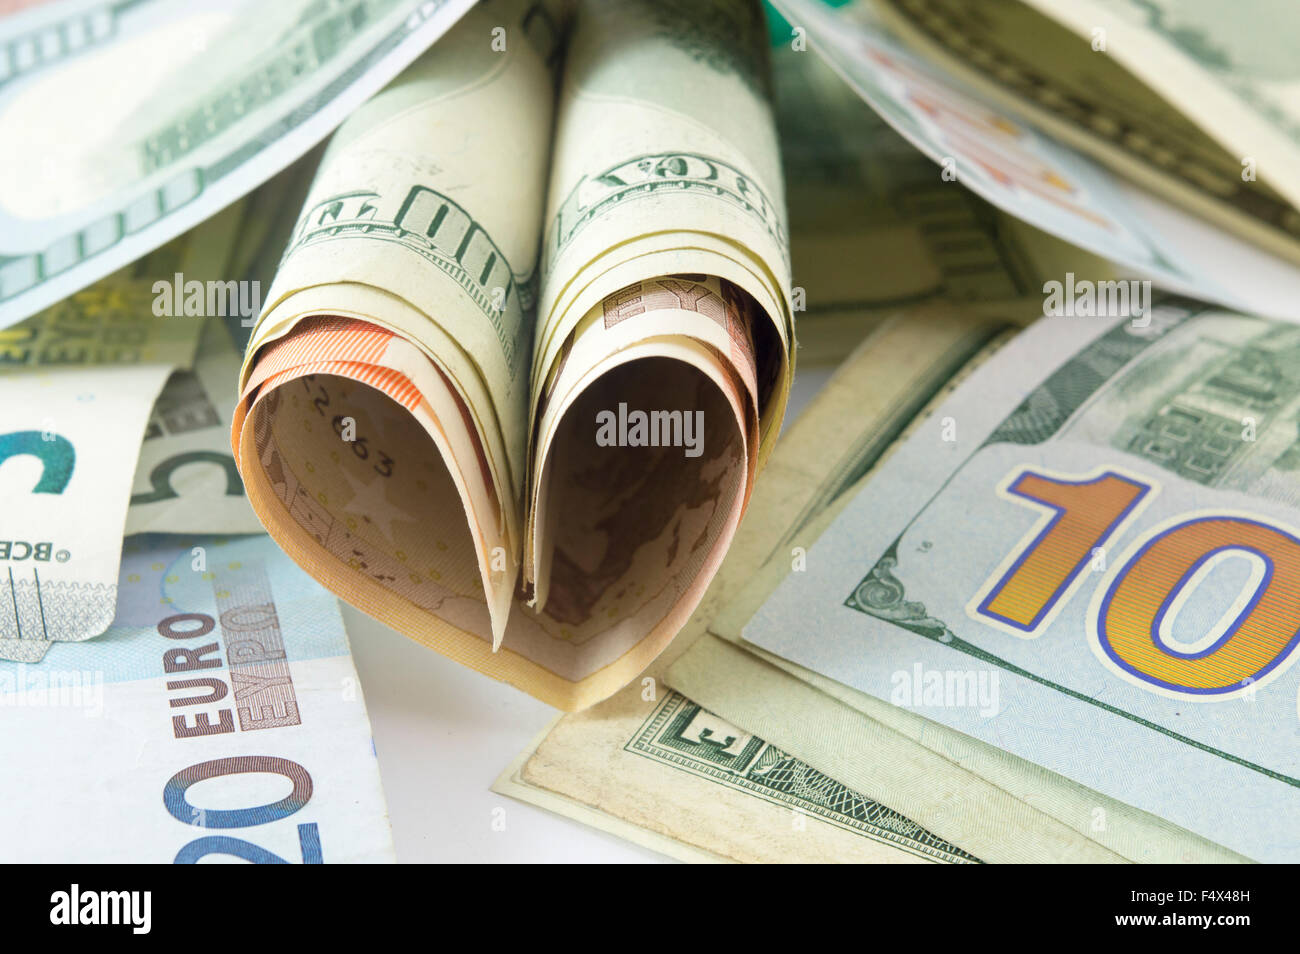 Bunch of dollar bills on the table forming a heart shape Stock Photo